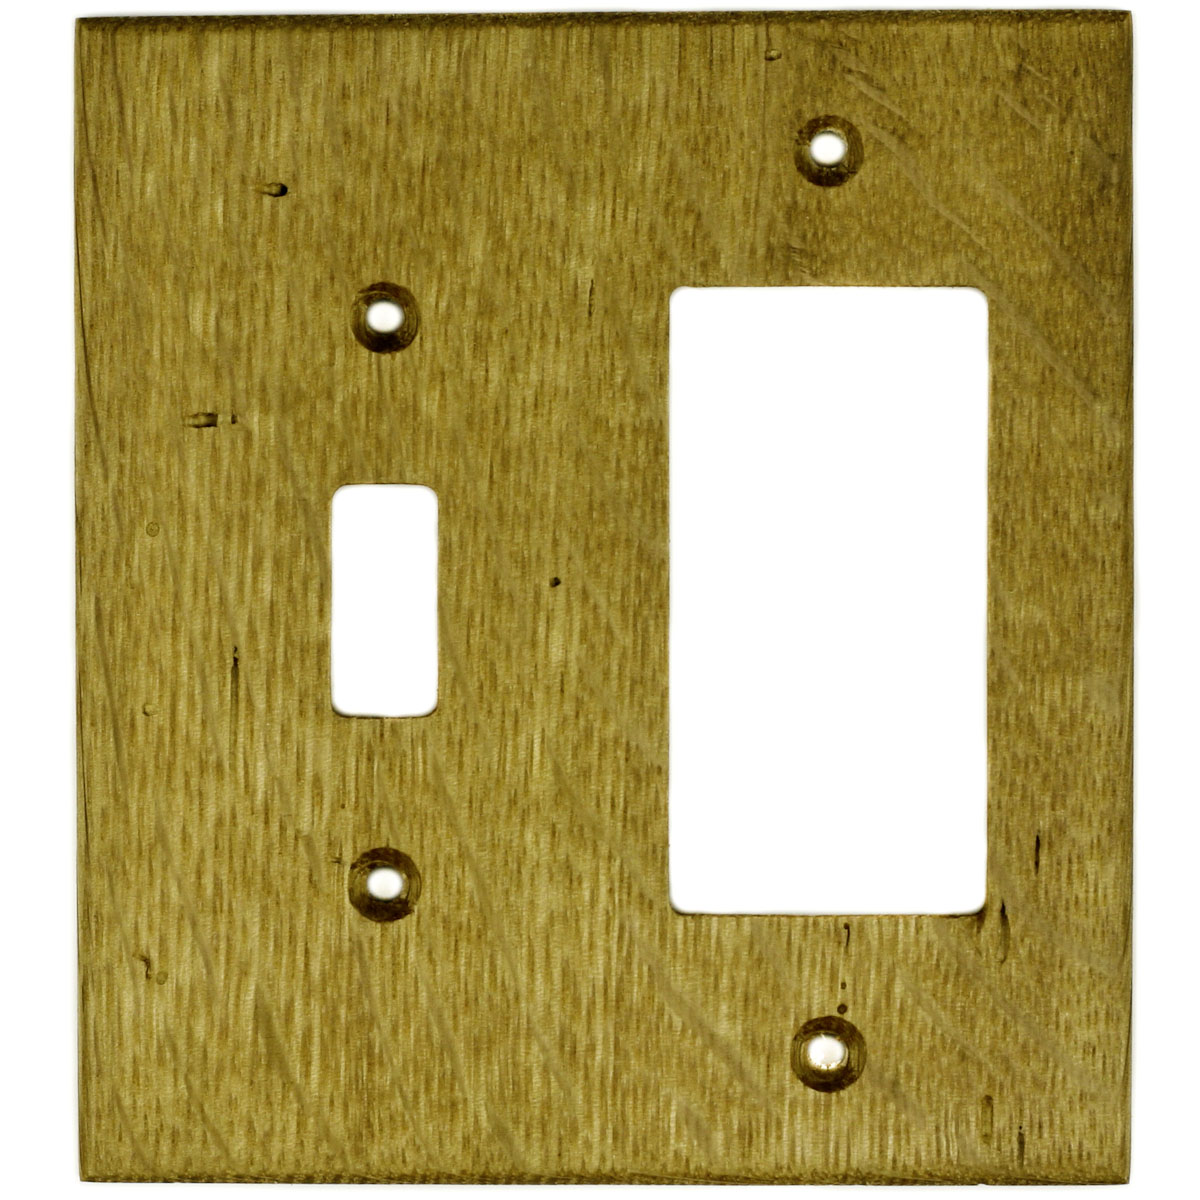 Oak Reclaimed Wood Wall Plate - 2 Gang Combo - Light Switch, GFCI Outlet  Cover